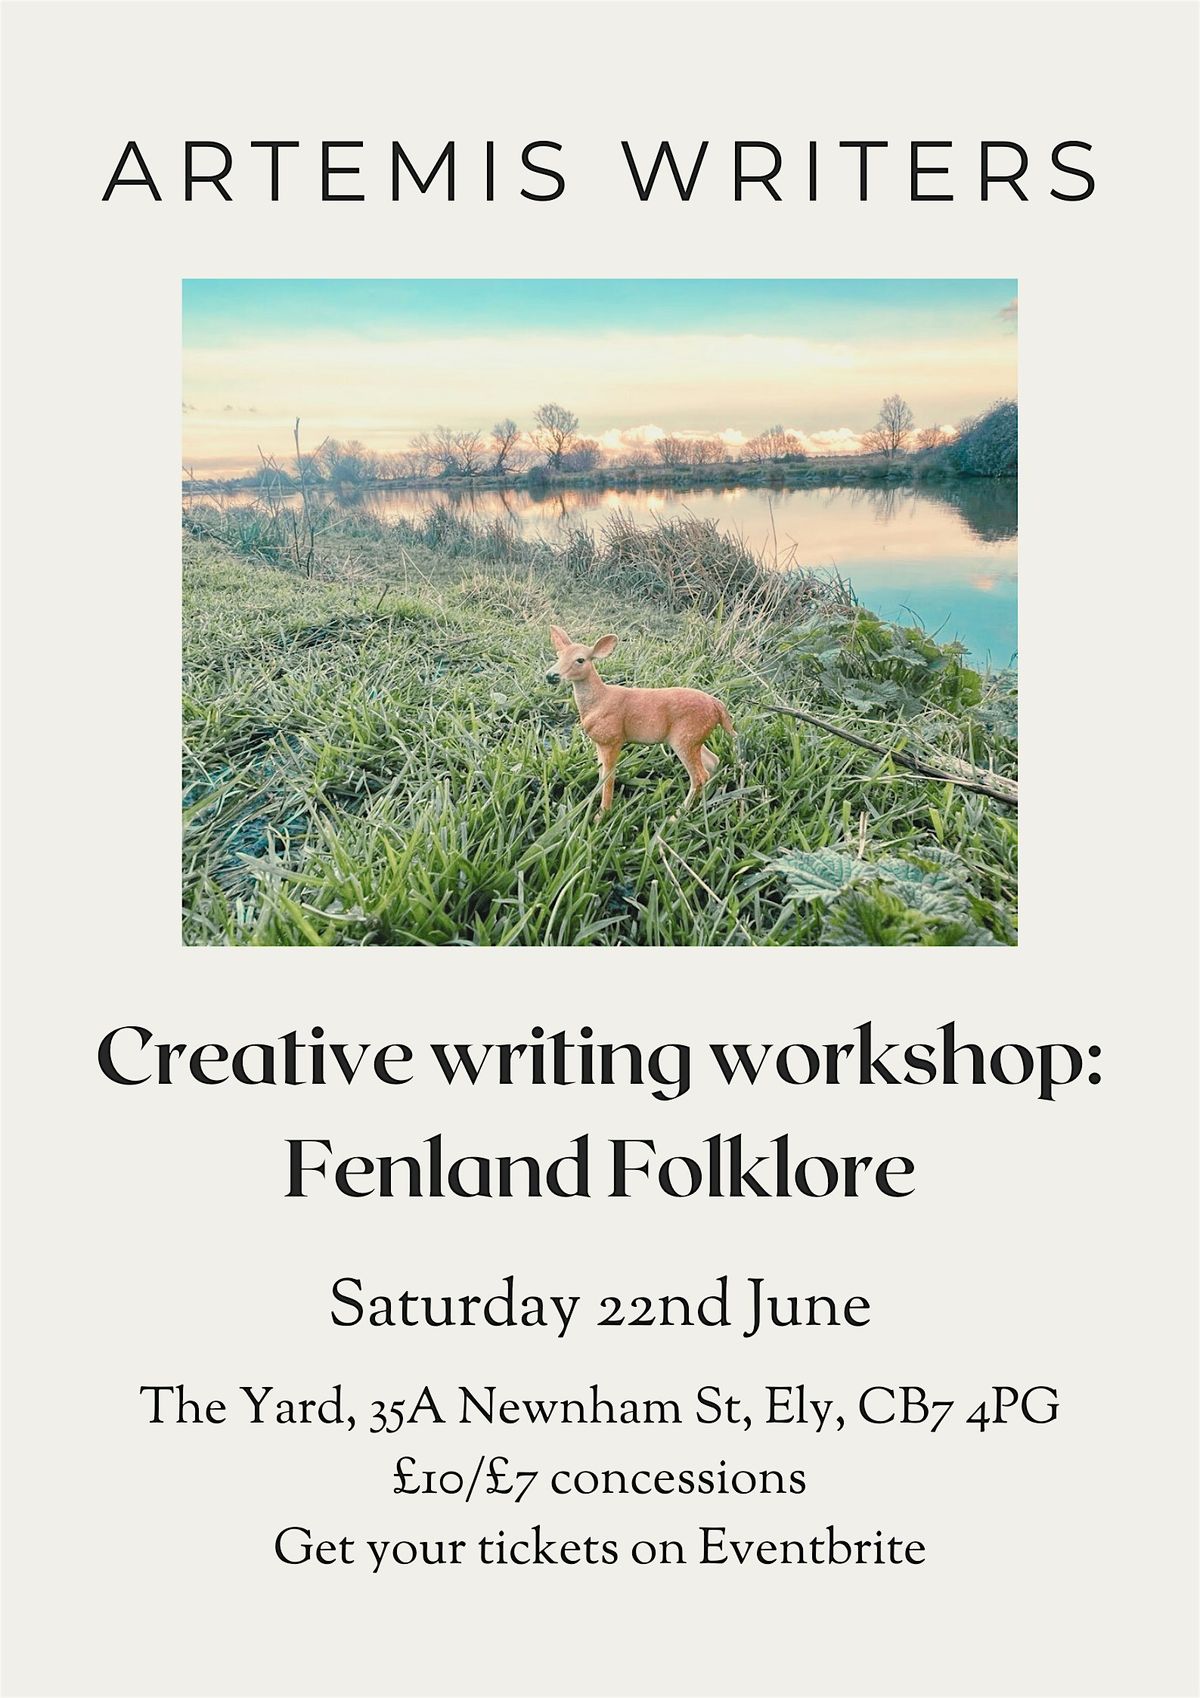 Creative Writing Workshop - Fen Folklore with Artemis Writers